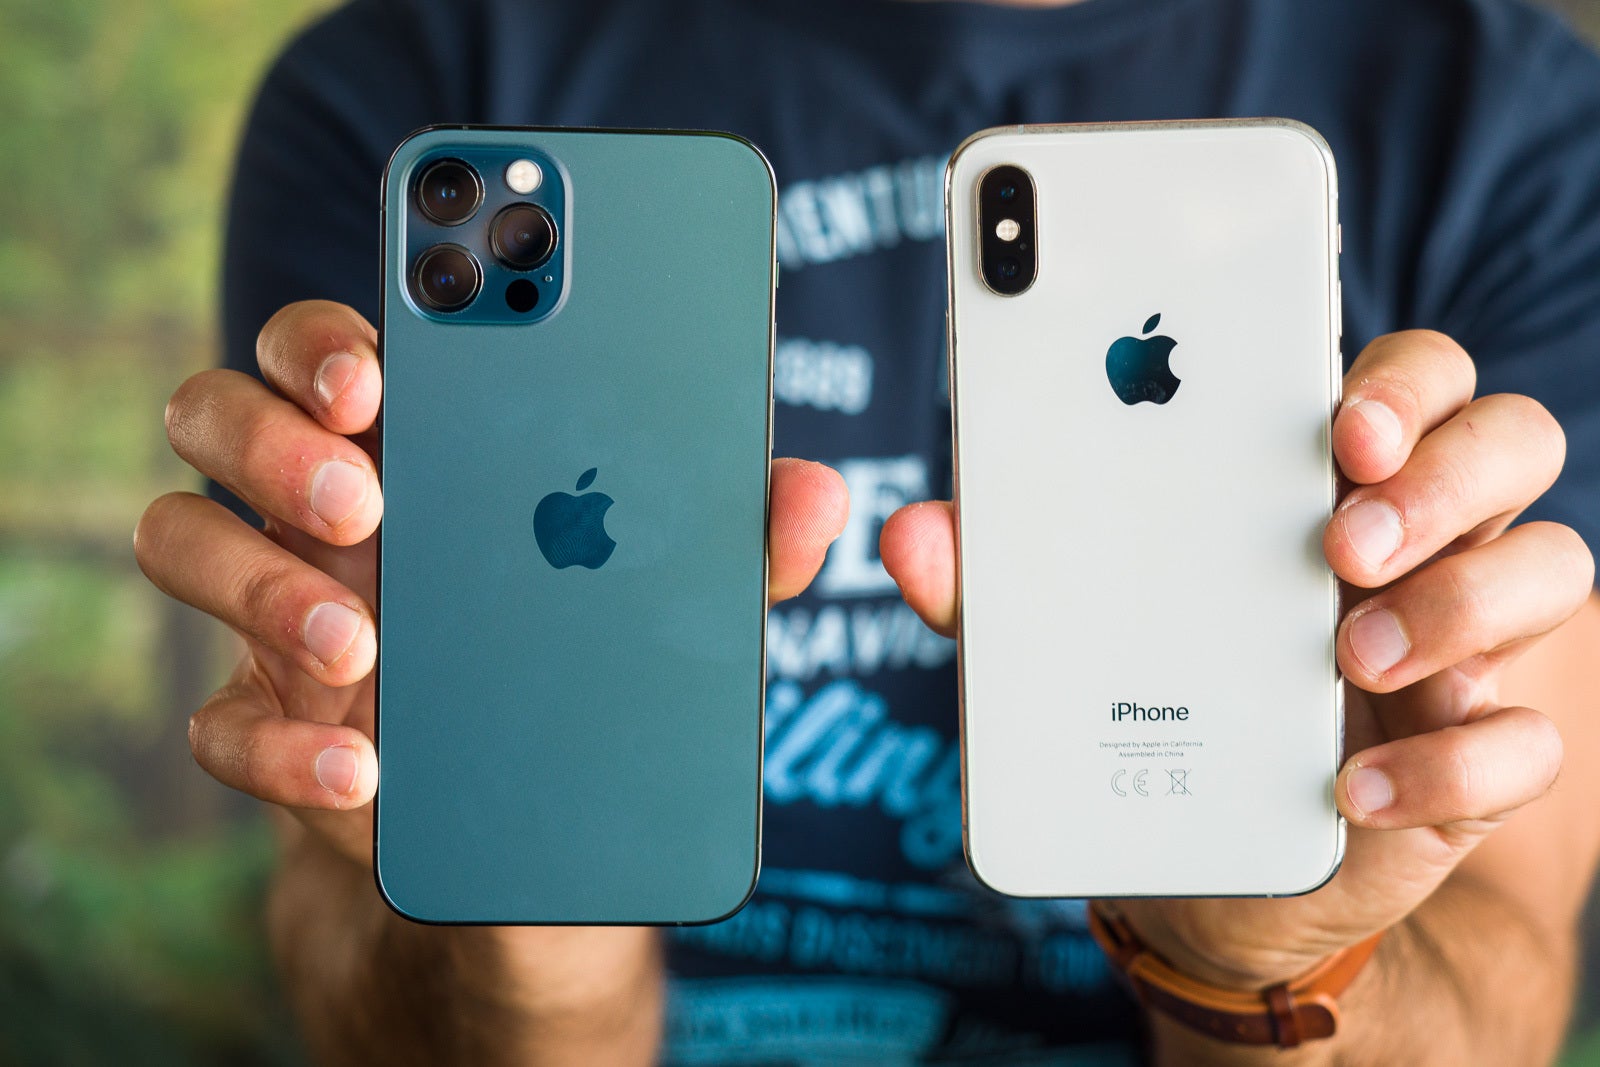 iPhone 12 Pro vs iPhone XS - Another report lends weight to 'iPhone 13' name for Apple's 2021 iPhones